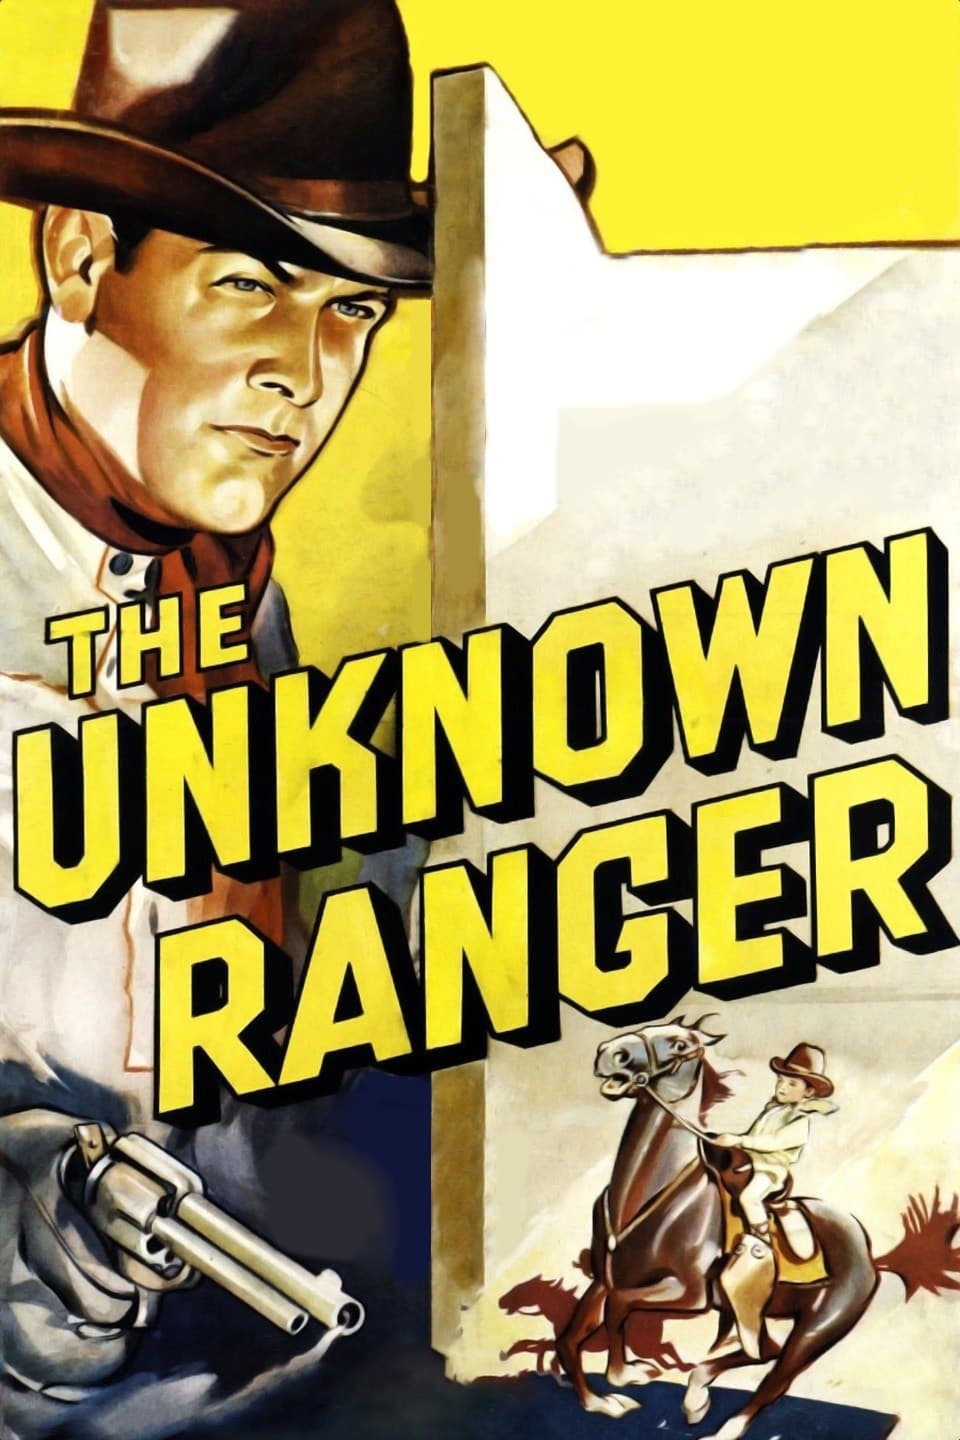 The Unknown Ranger